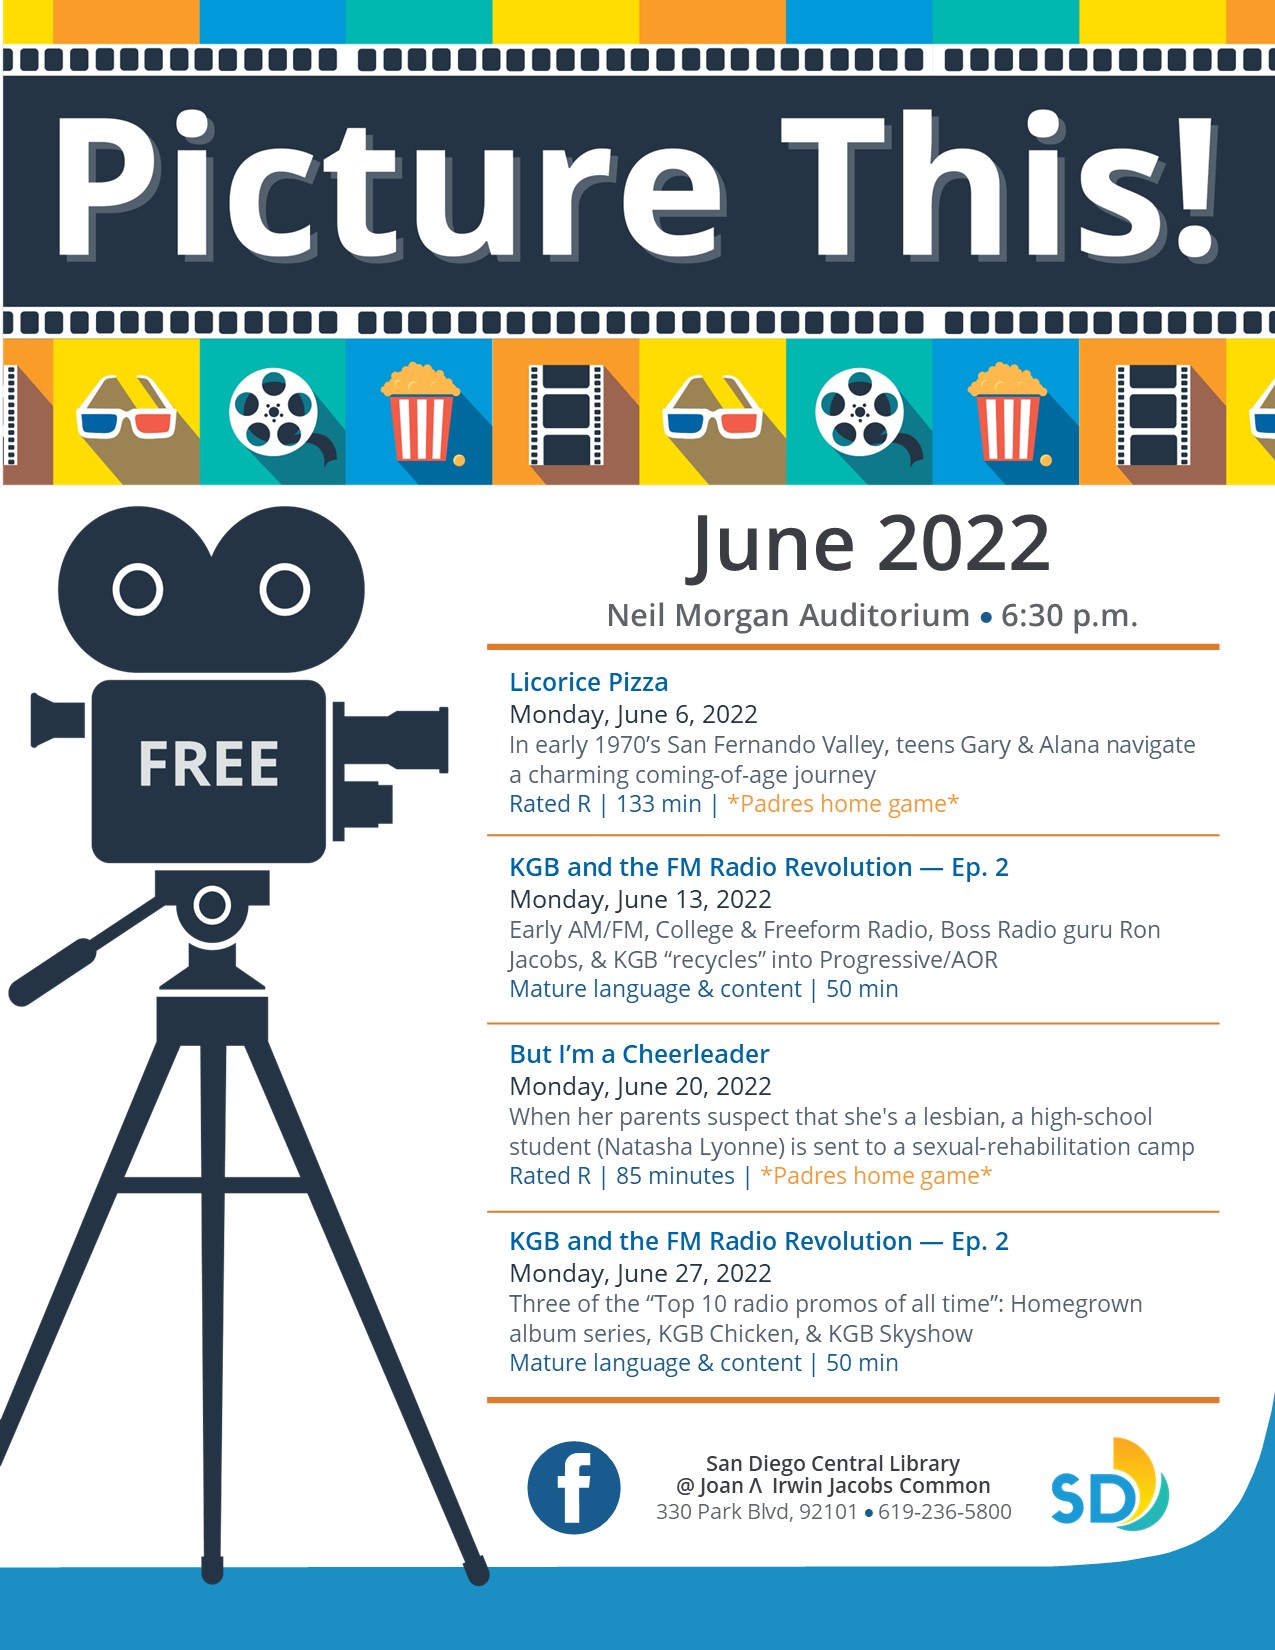 June lineup for Picture This! a library program featuring free film screenings Mondays at 6:30 pm in the Central Library's Neil Morgan Auditorium.